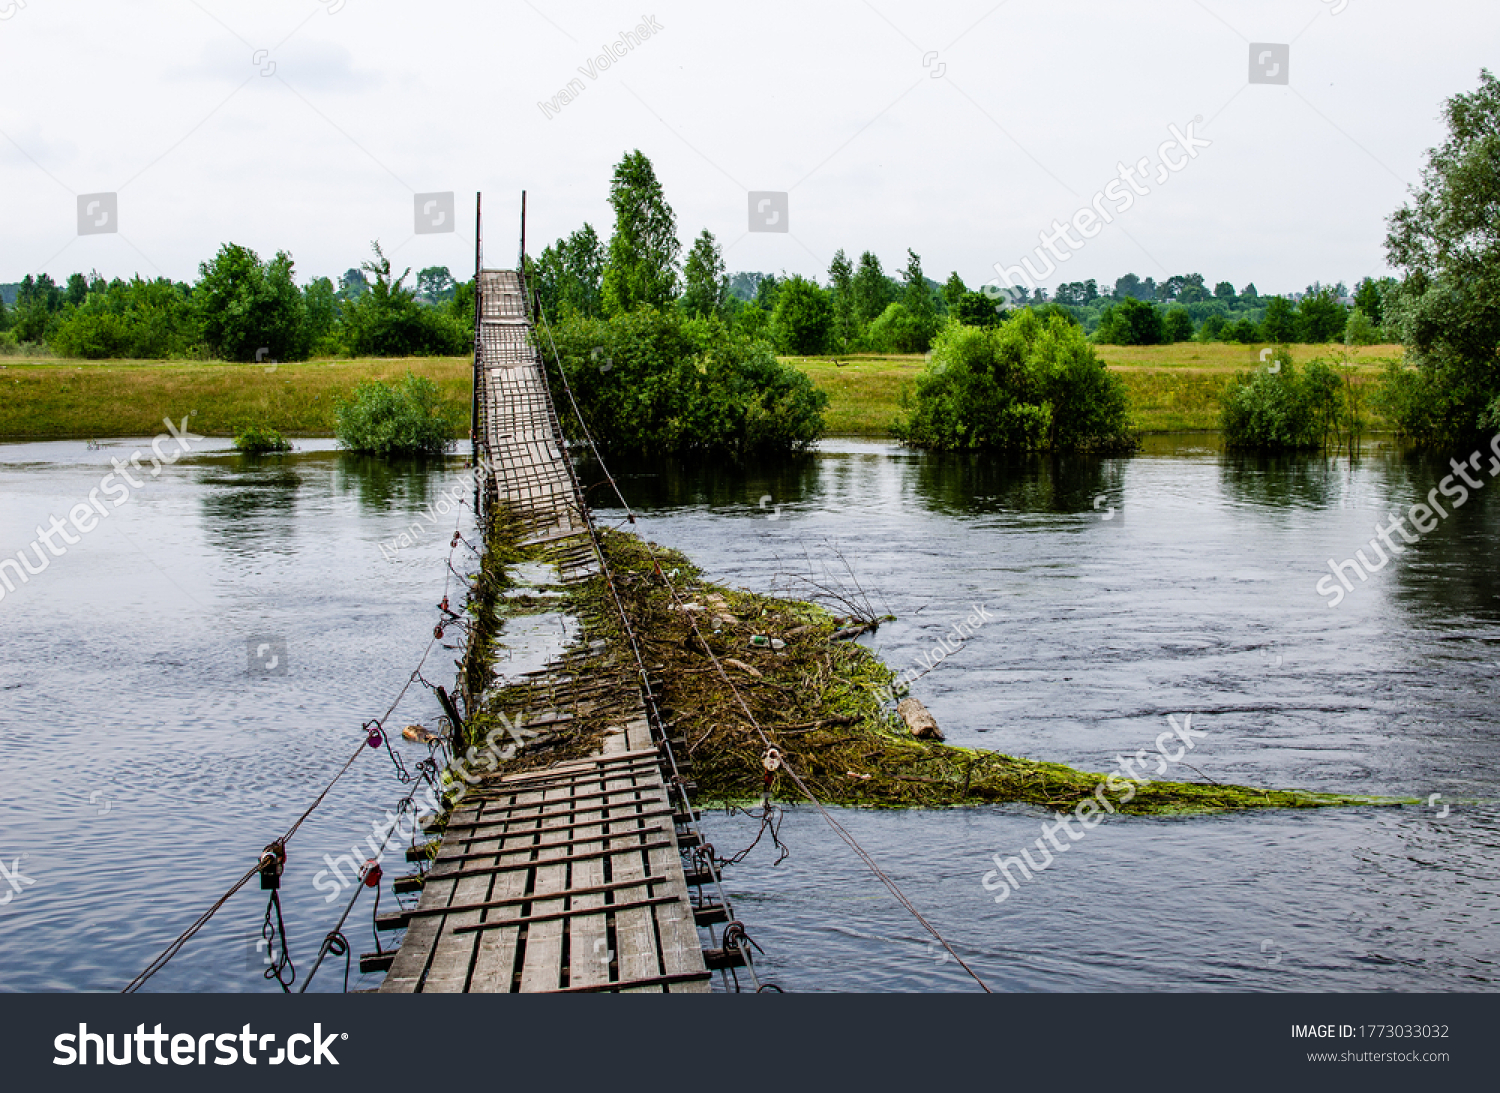 Suspension bridge over the river is broken and flooded against the backdrop of a summer landscape #1773033032